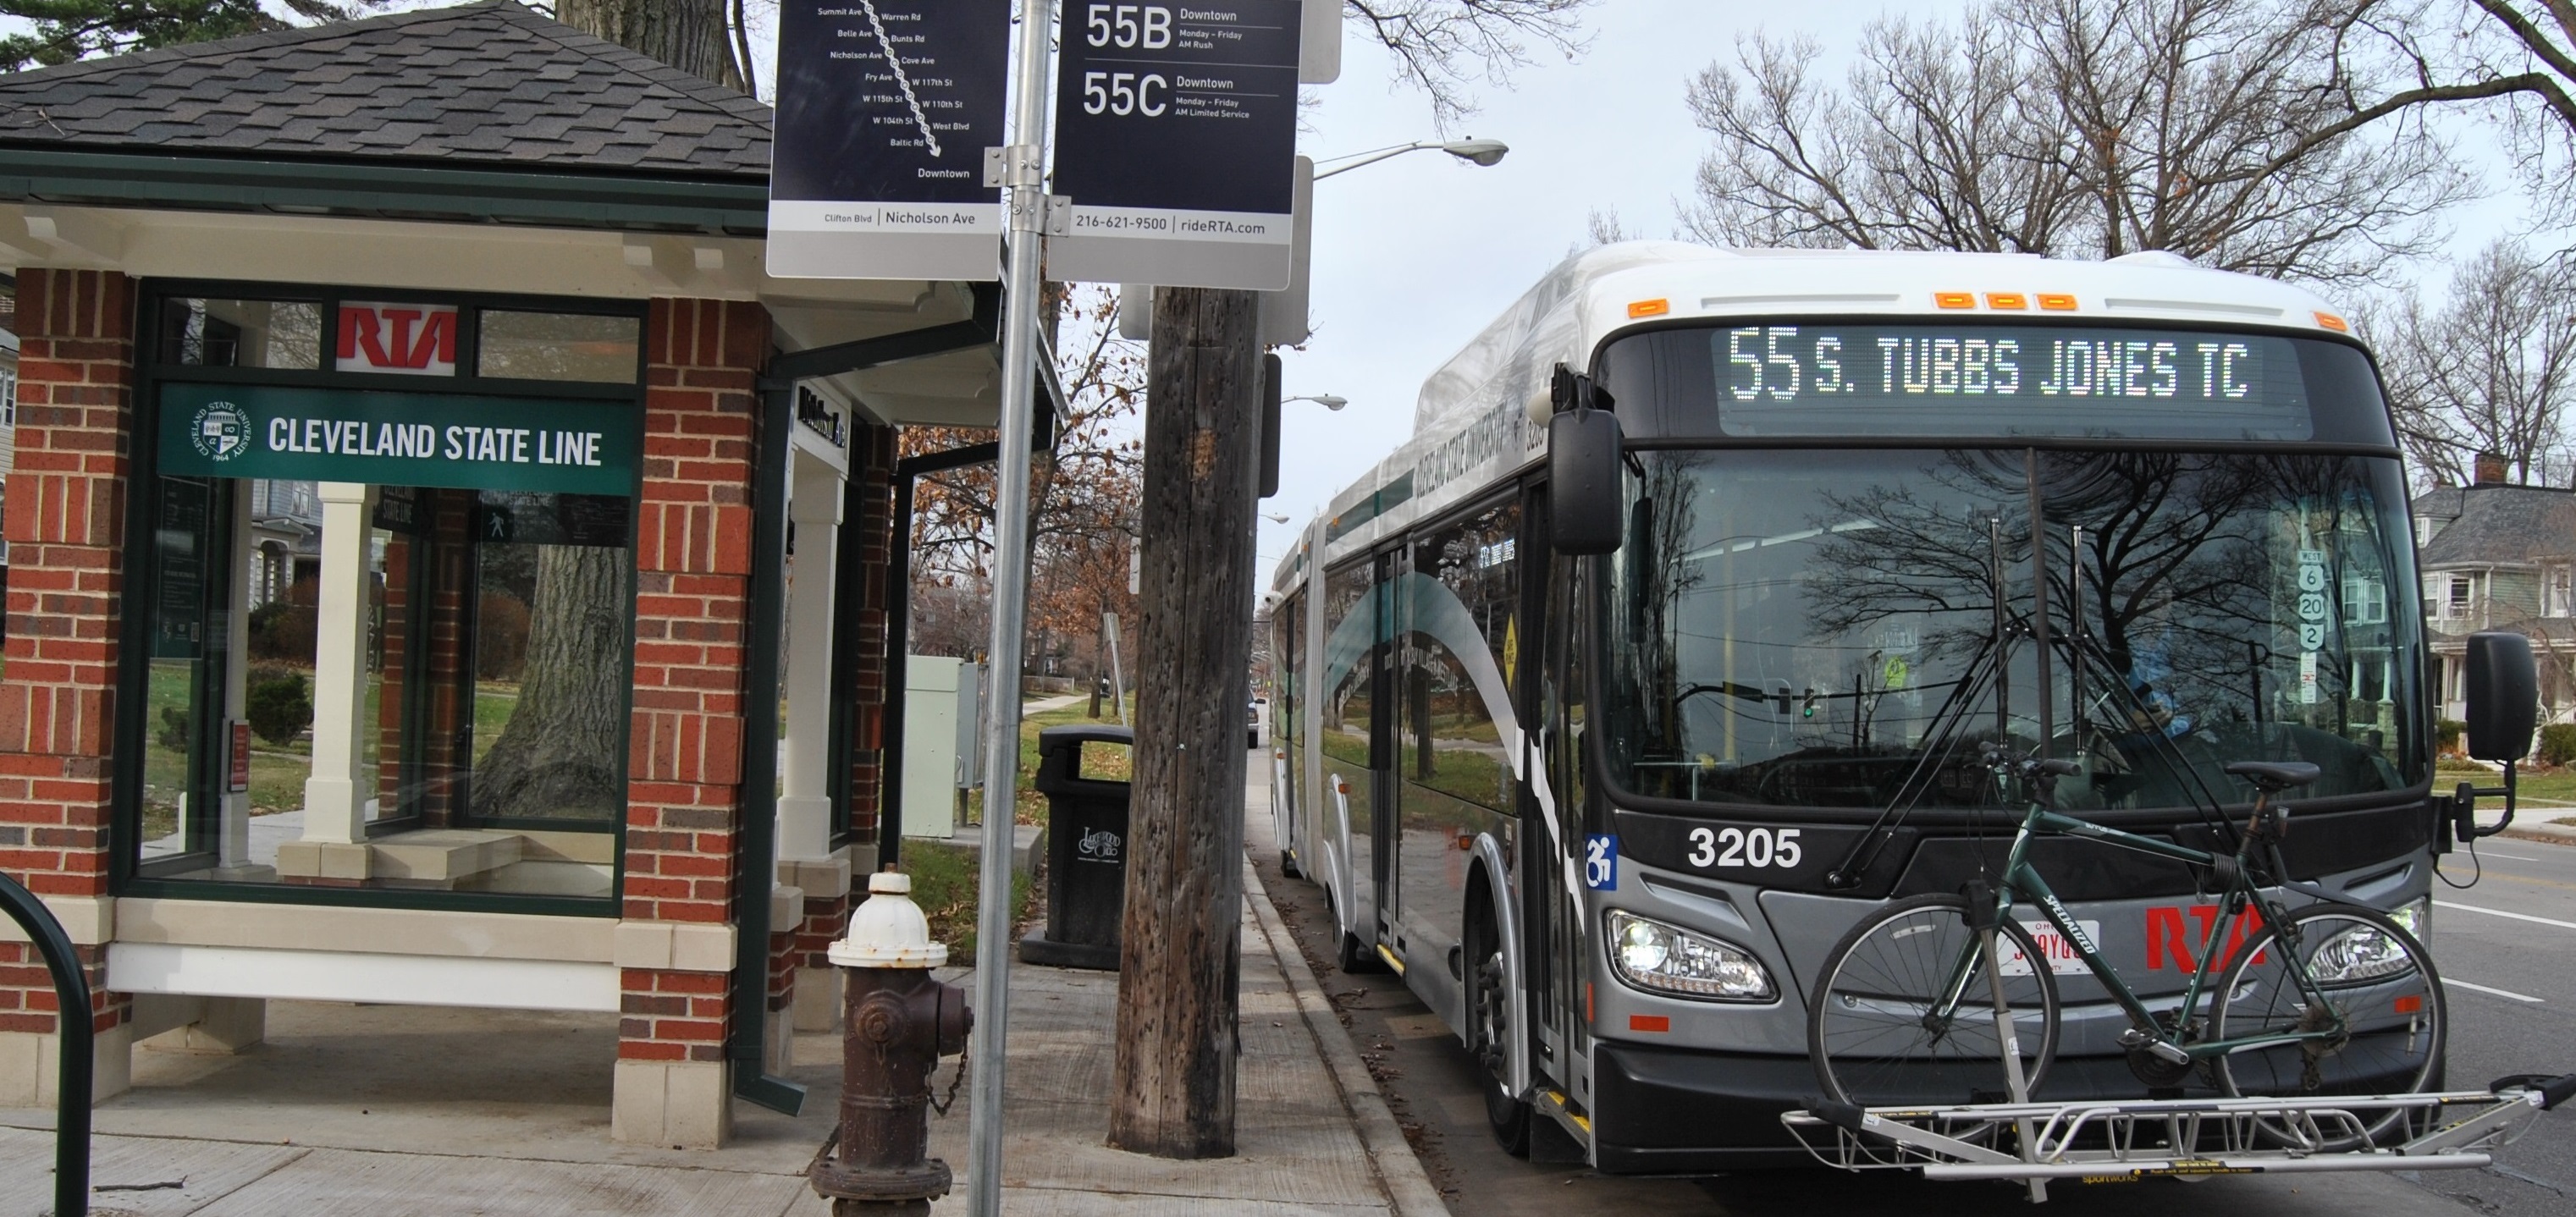  Aug. 5, 2015: Ridership up 28 percent on Cleveland State Line